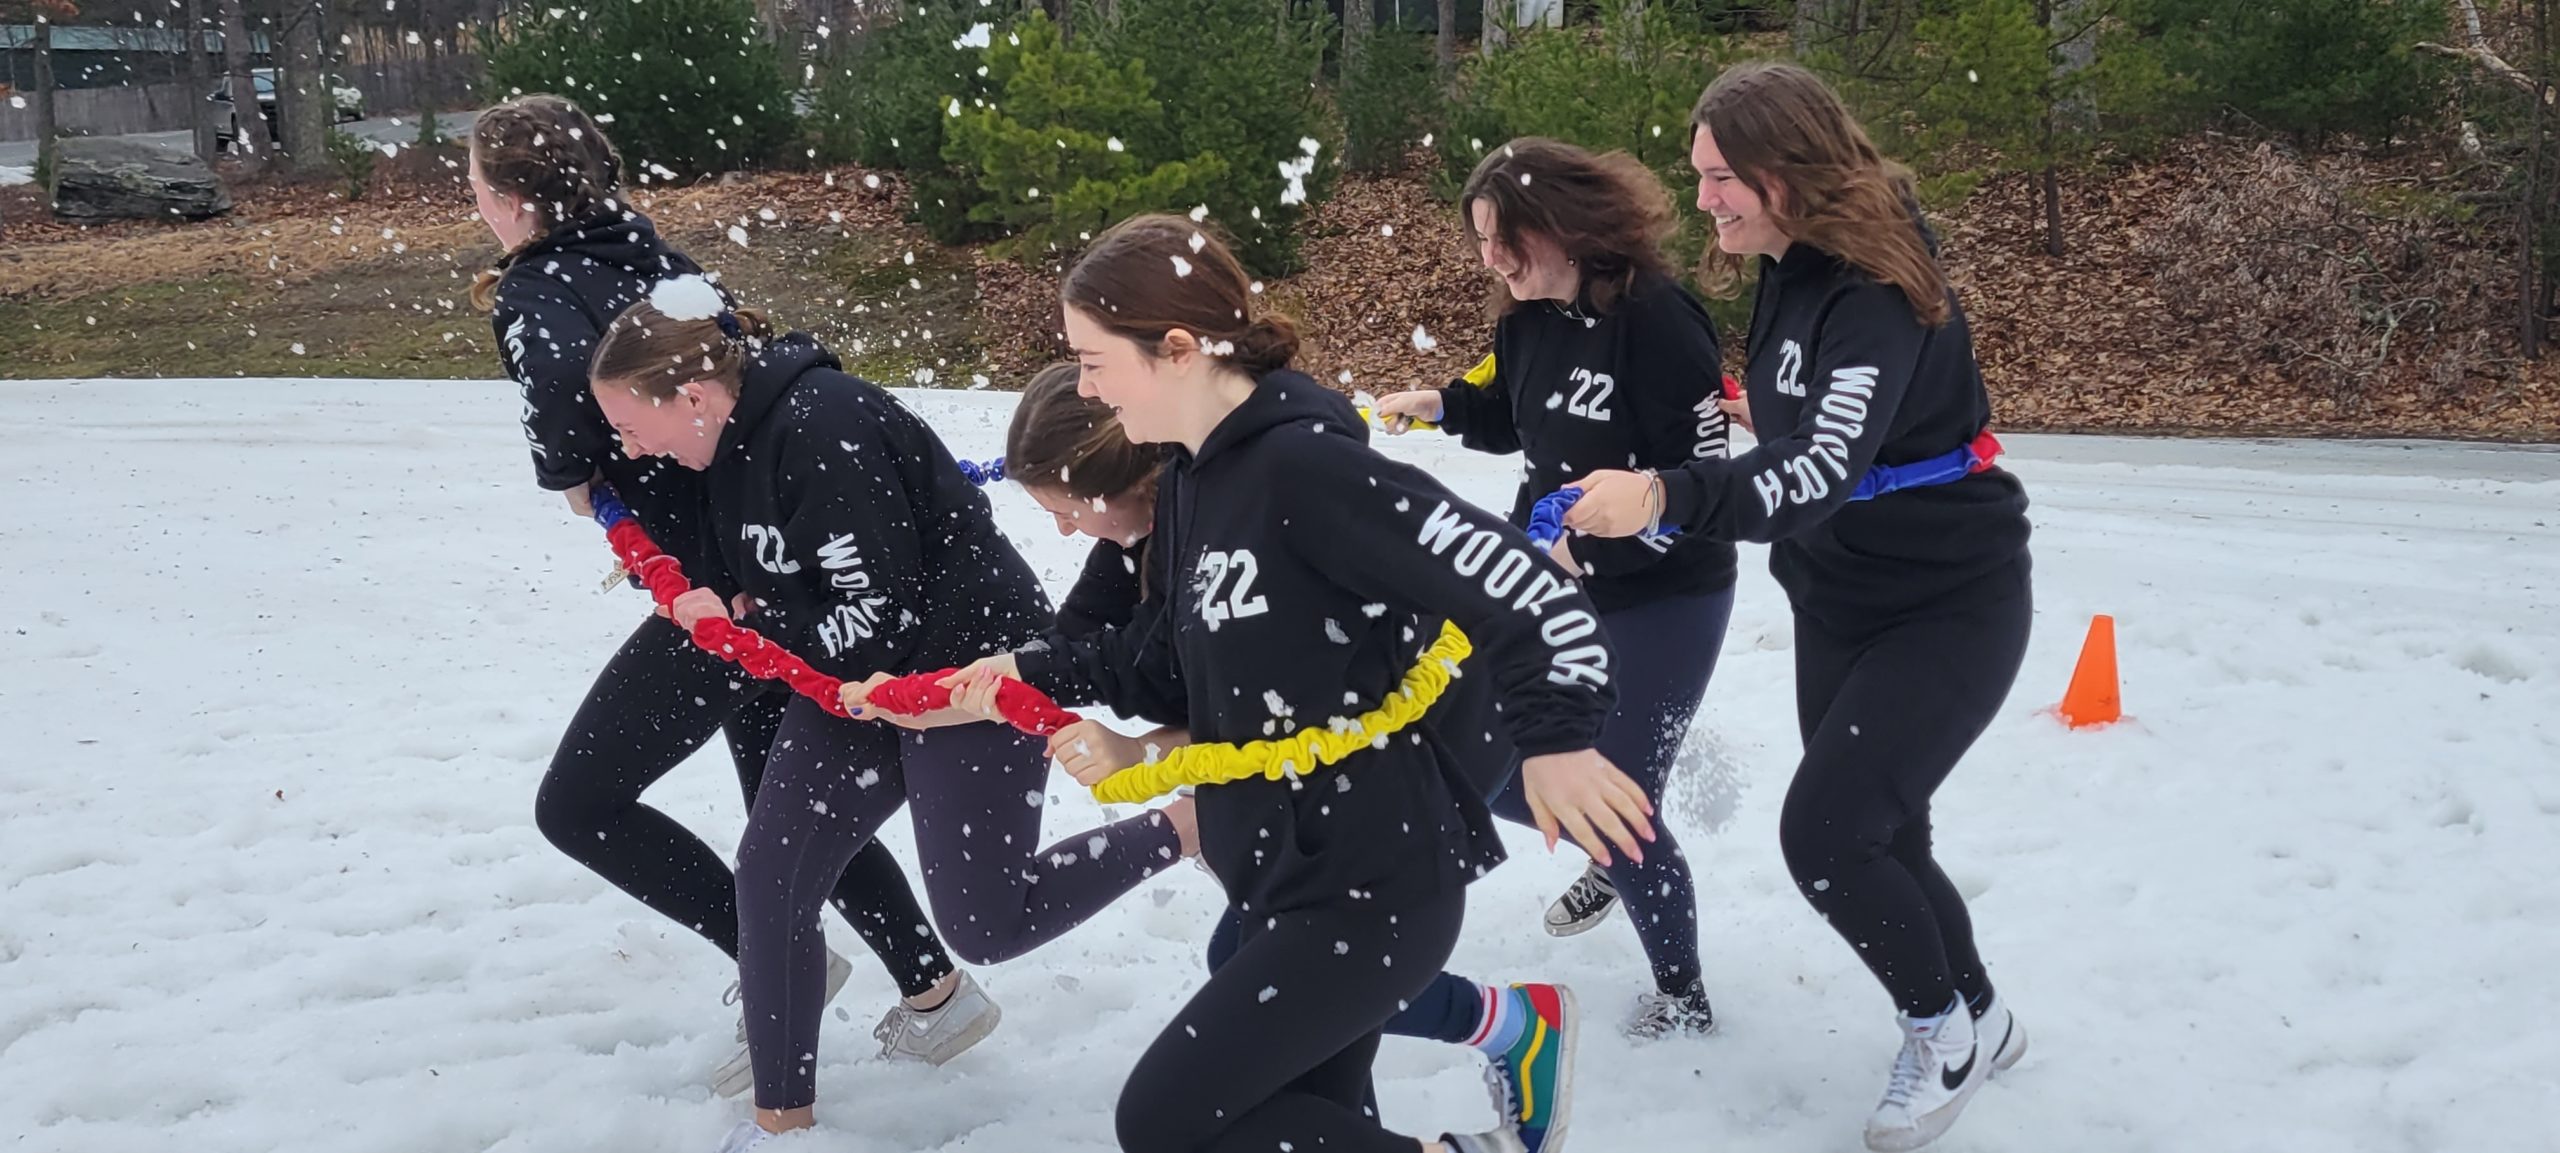 The Hampton Bays High School Class of 2022
recently participated in a senior trip to Woodloch Pines in the Poconos, Pennsylvania. On the trip, the 06 students competed in a variety of team building games.